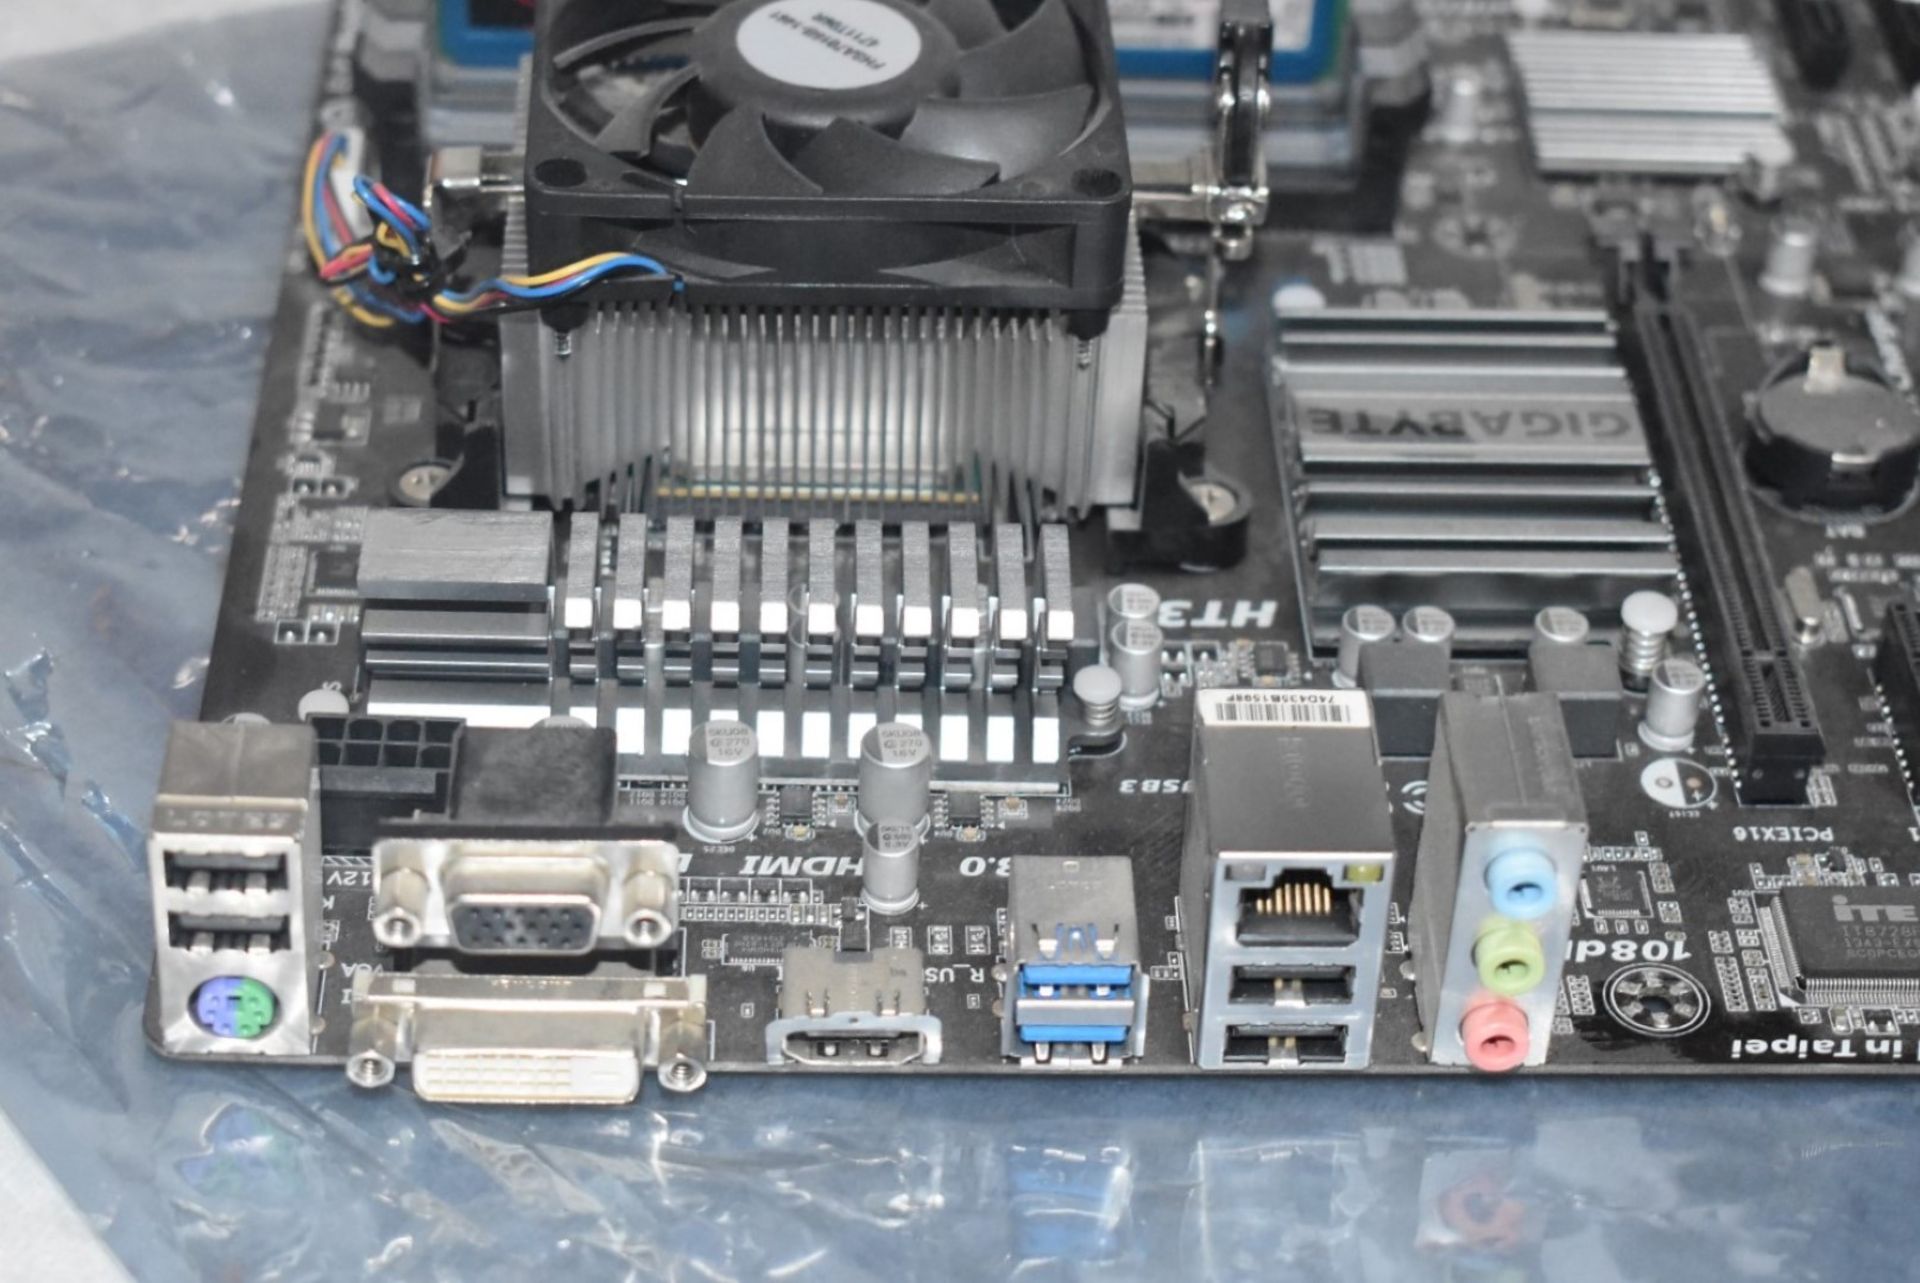 1 x Gigabyte GA-78LMT-USB3 Motherboard With an AMD FX-8370 8 Core Processor and 4gb Ram - Image 5 of 7